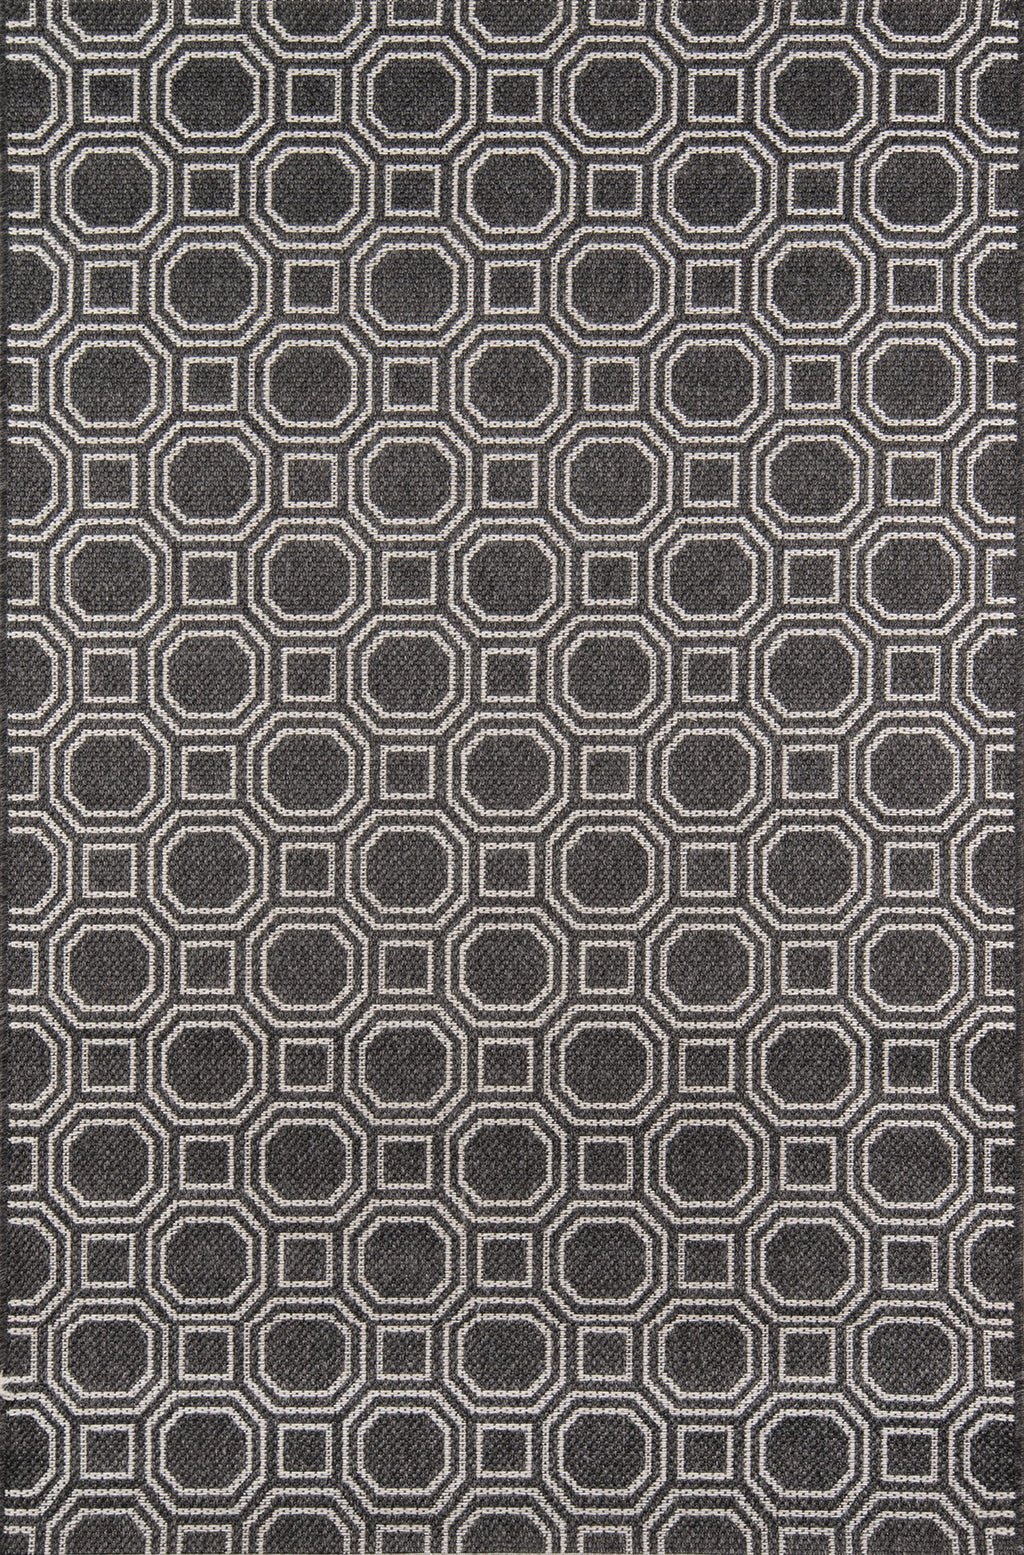 Momeni Downeast DOW-1 Charcoal Area Rug by Erin Gates main image